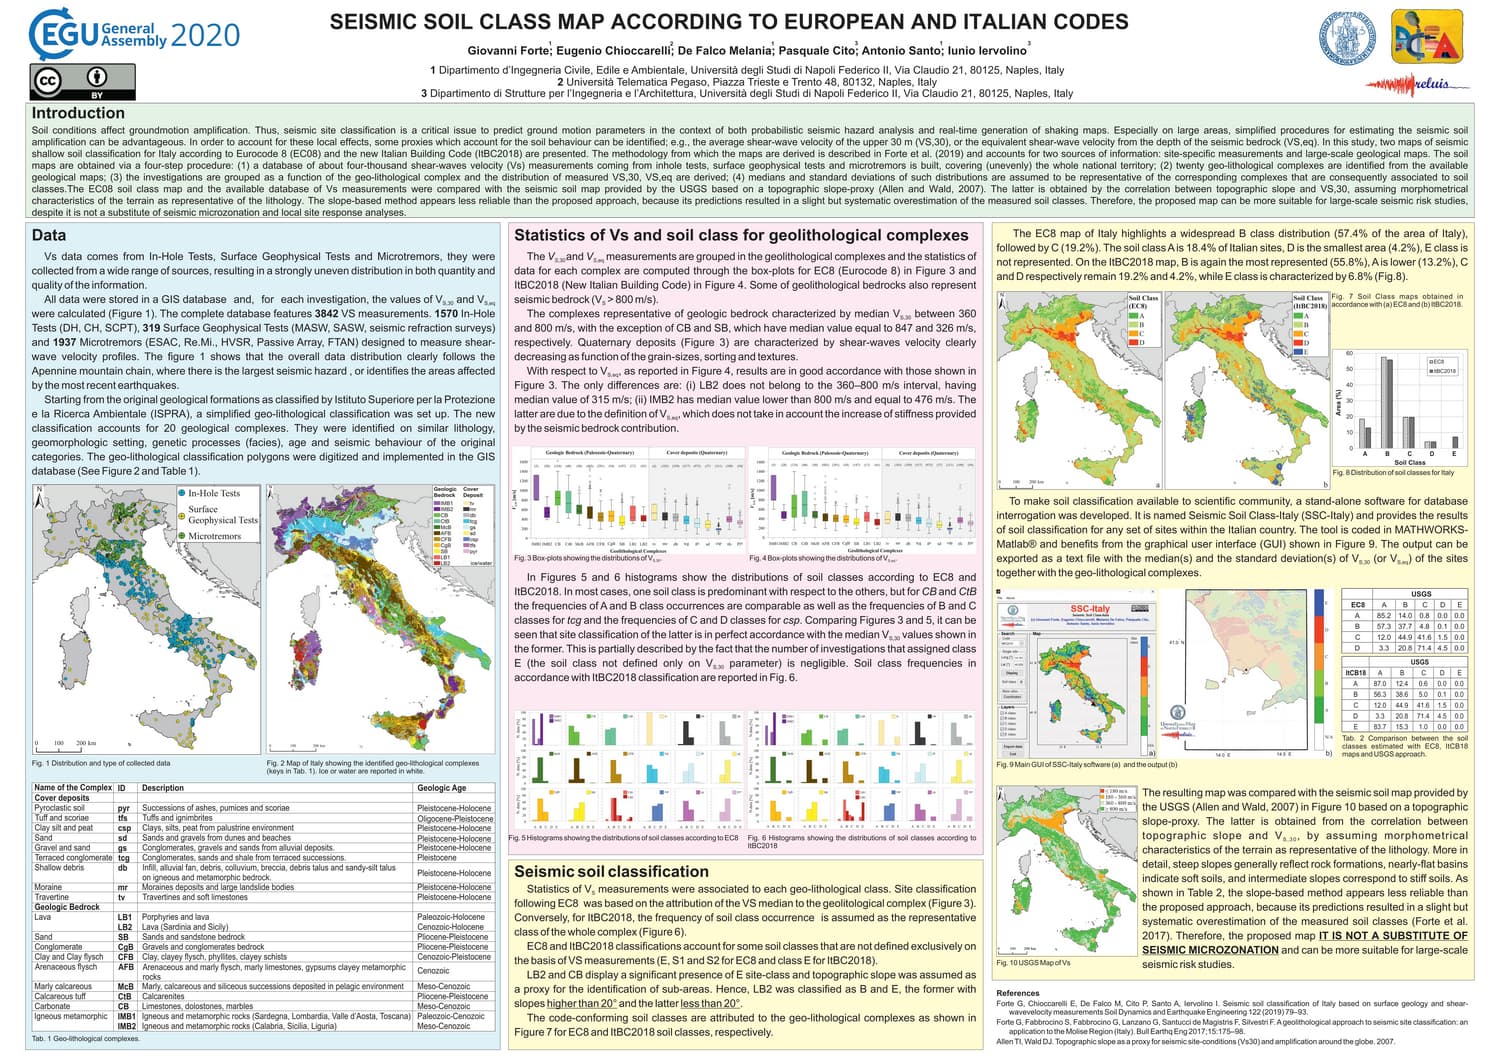 Seismic soil class map for Italy according to European and Italian codes map